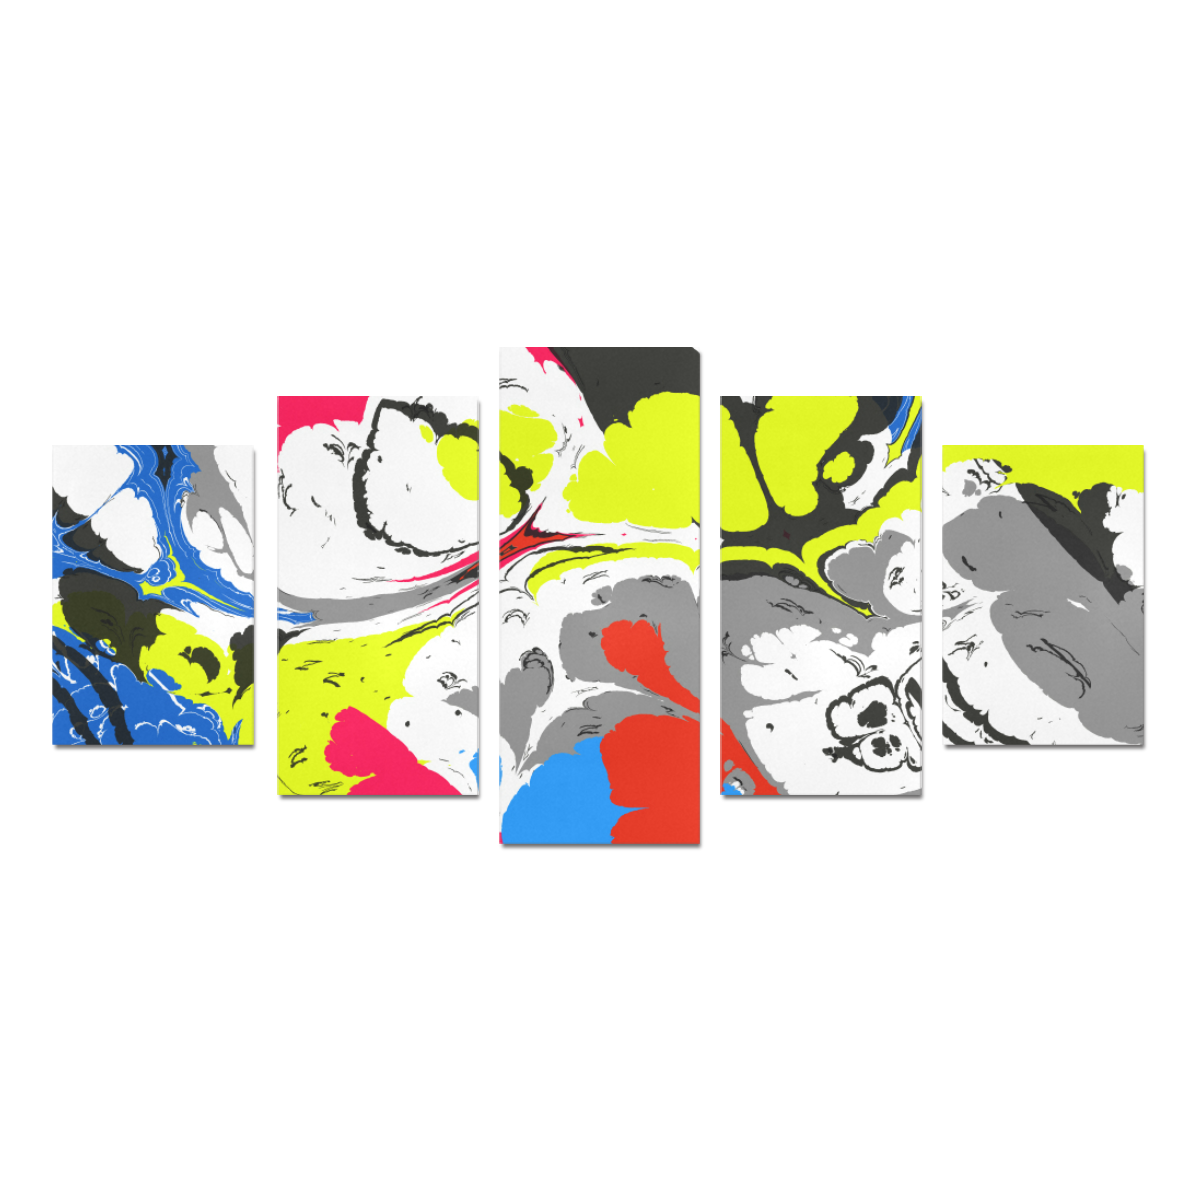 Colorful distorted shapes2 Canvas Print Sets D (No Frame)